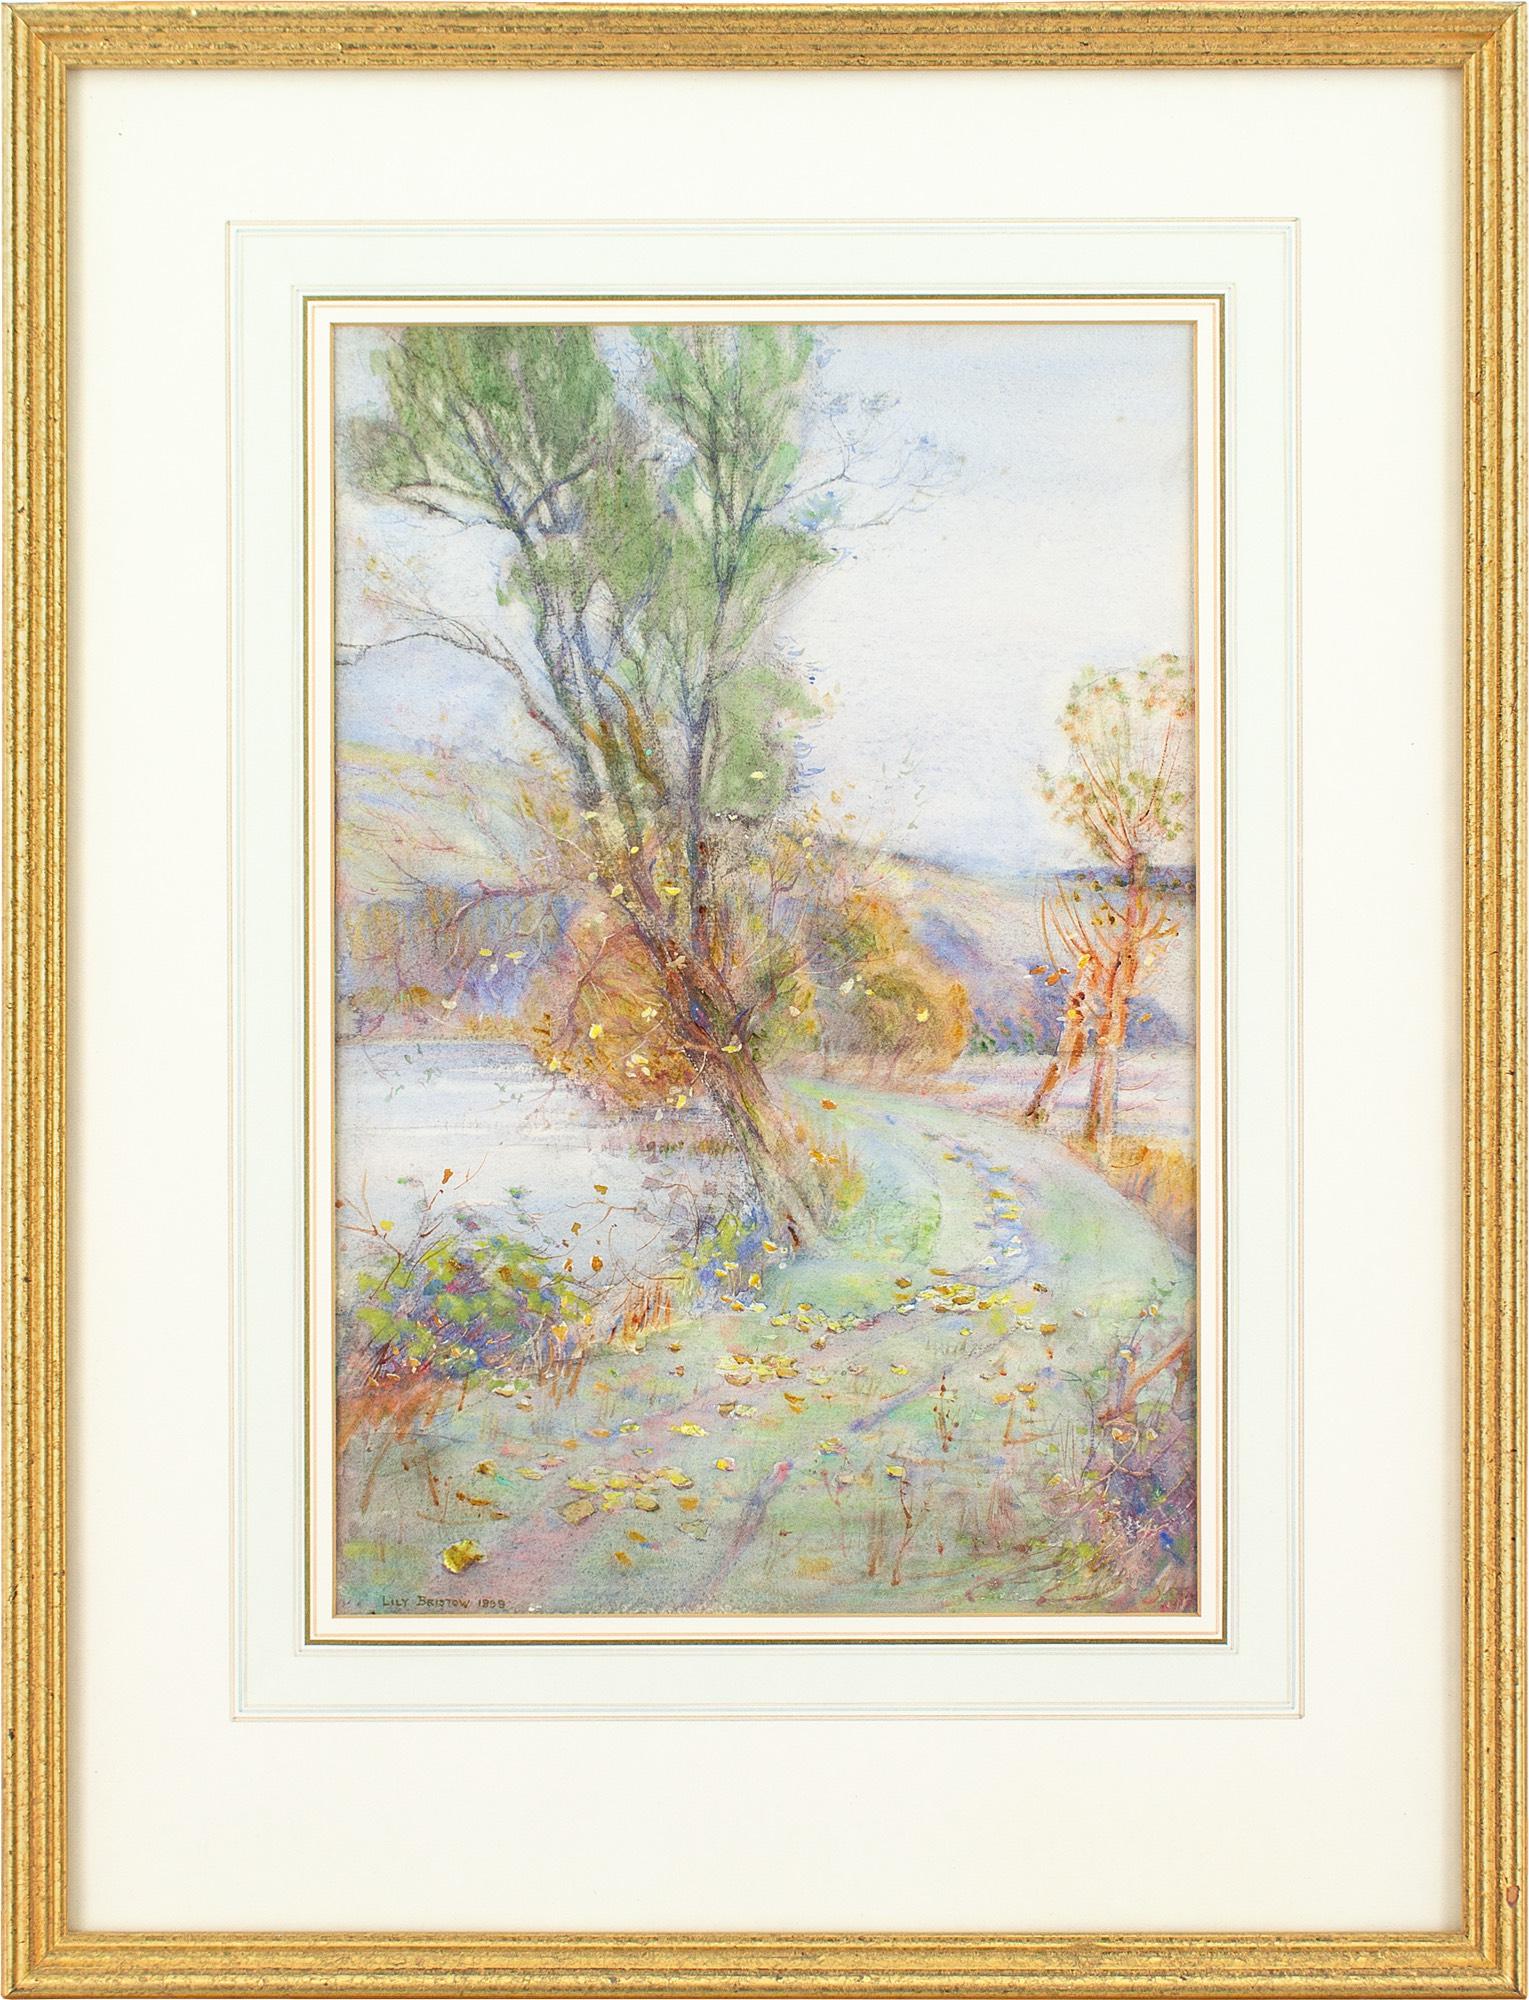 This beautiful late 19th-century watercolour by British artist Lily Bristow (1864-1935) depicts a picturesque autumnal view.

The crunch of Autumn peppers a winding track as windswept trees lean, partially bereft. Golden tones and tinted foliage